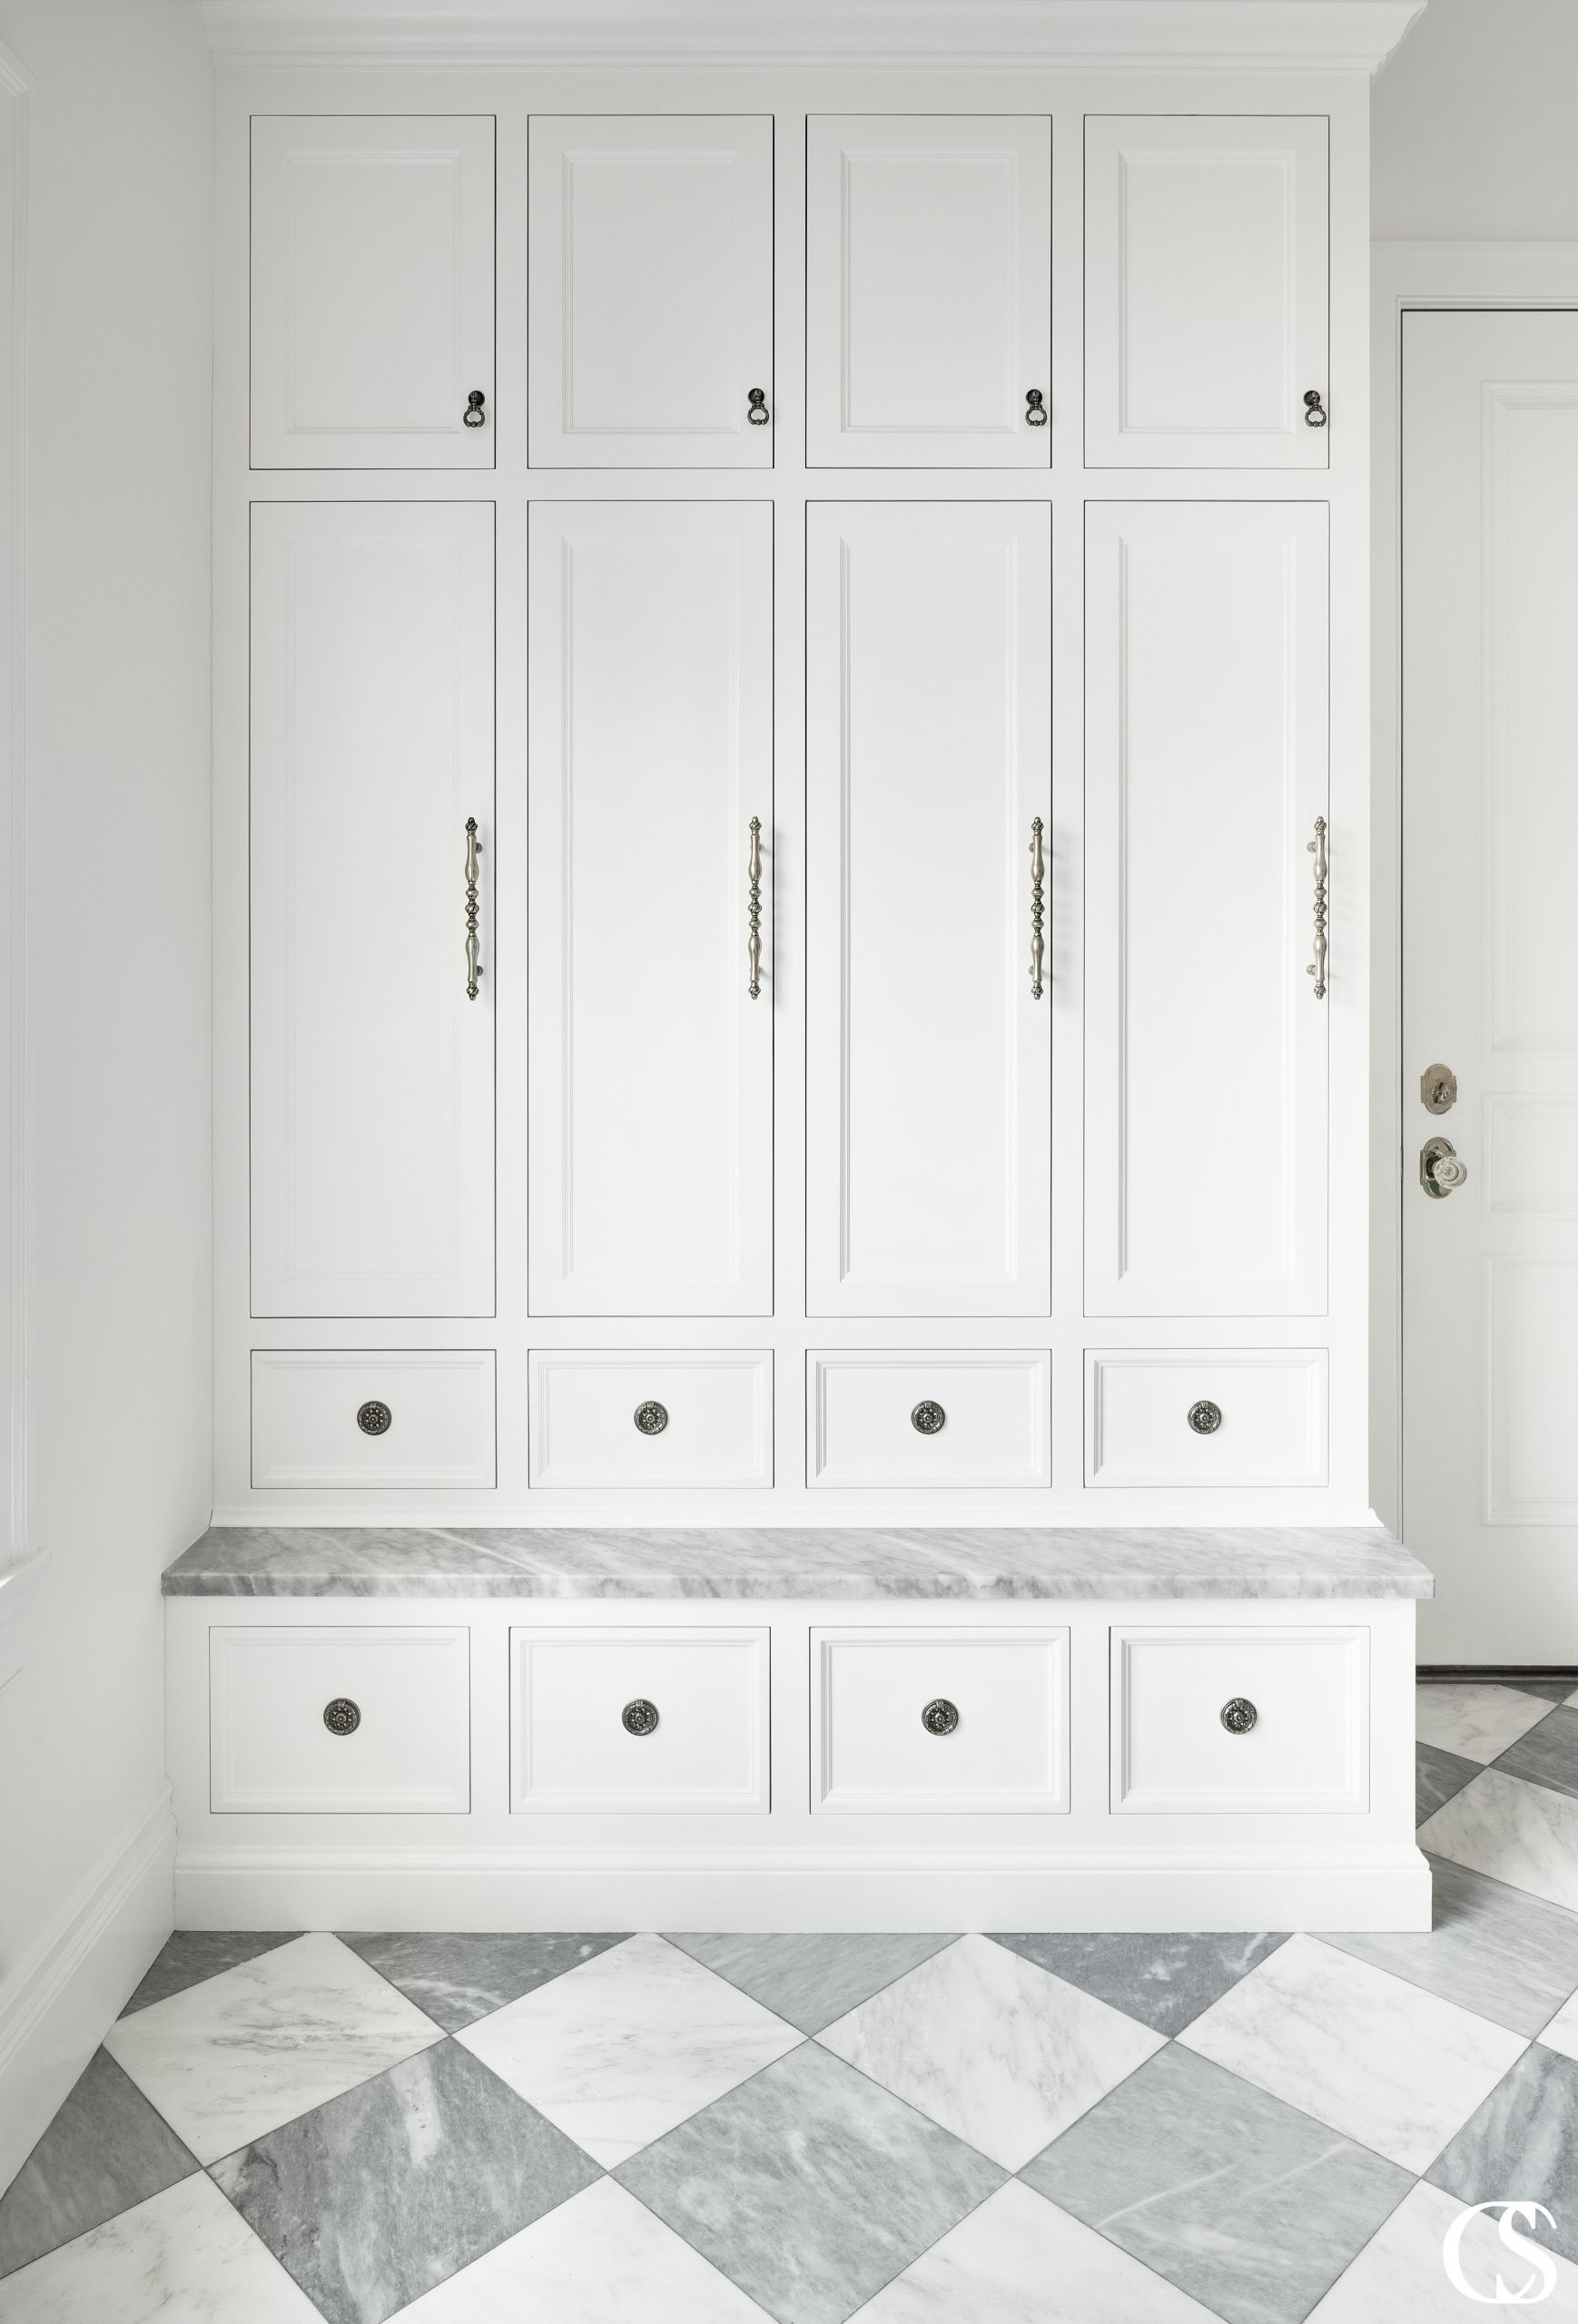 This classic mudroom design utilizes locker-like custom cabinets with a bench for the ultimate storage solution in a small space.